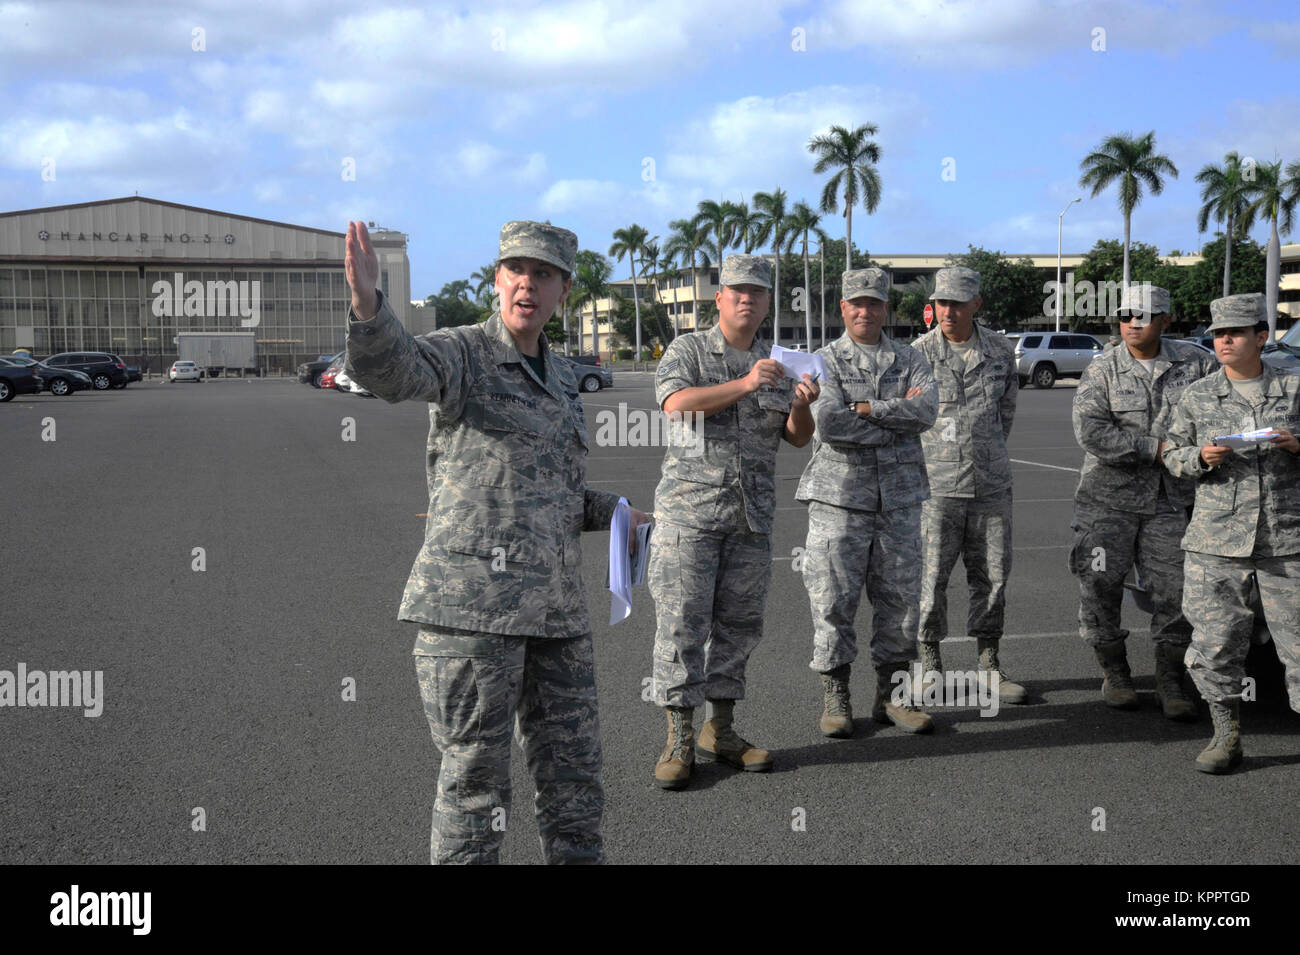 Reserve Citizen Airman Tech. Sgt. Christine Kearney-Kurt, a historian for the 624th Regional Support Group, explains the historic significance of the Base Operations building during a battlefield staff ride at Joint Base Pearl Harbor-Hickam, Hawaii, Dec. 3, 2017. The tour focused on the remnants of war from 76 years ago during the Dec. 7, 1941, attack at Hickam Field when America was launched into World War II. (U.S. Air Force Stock Photo